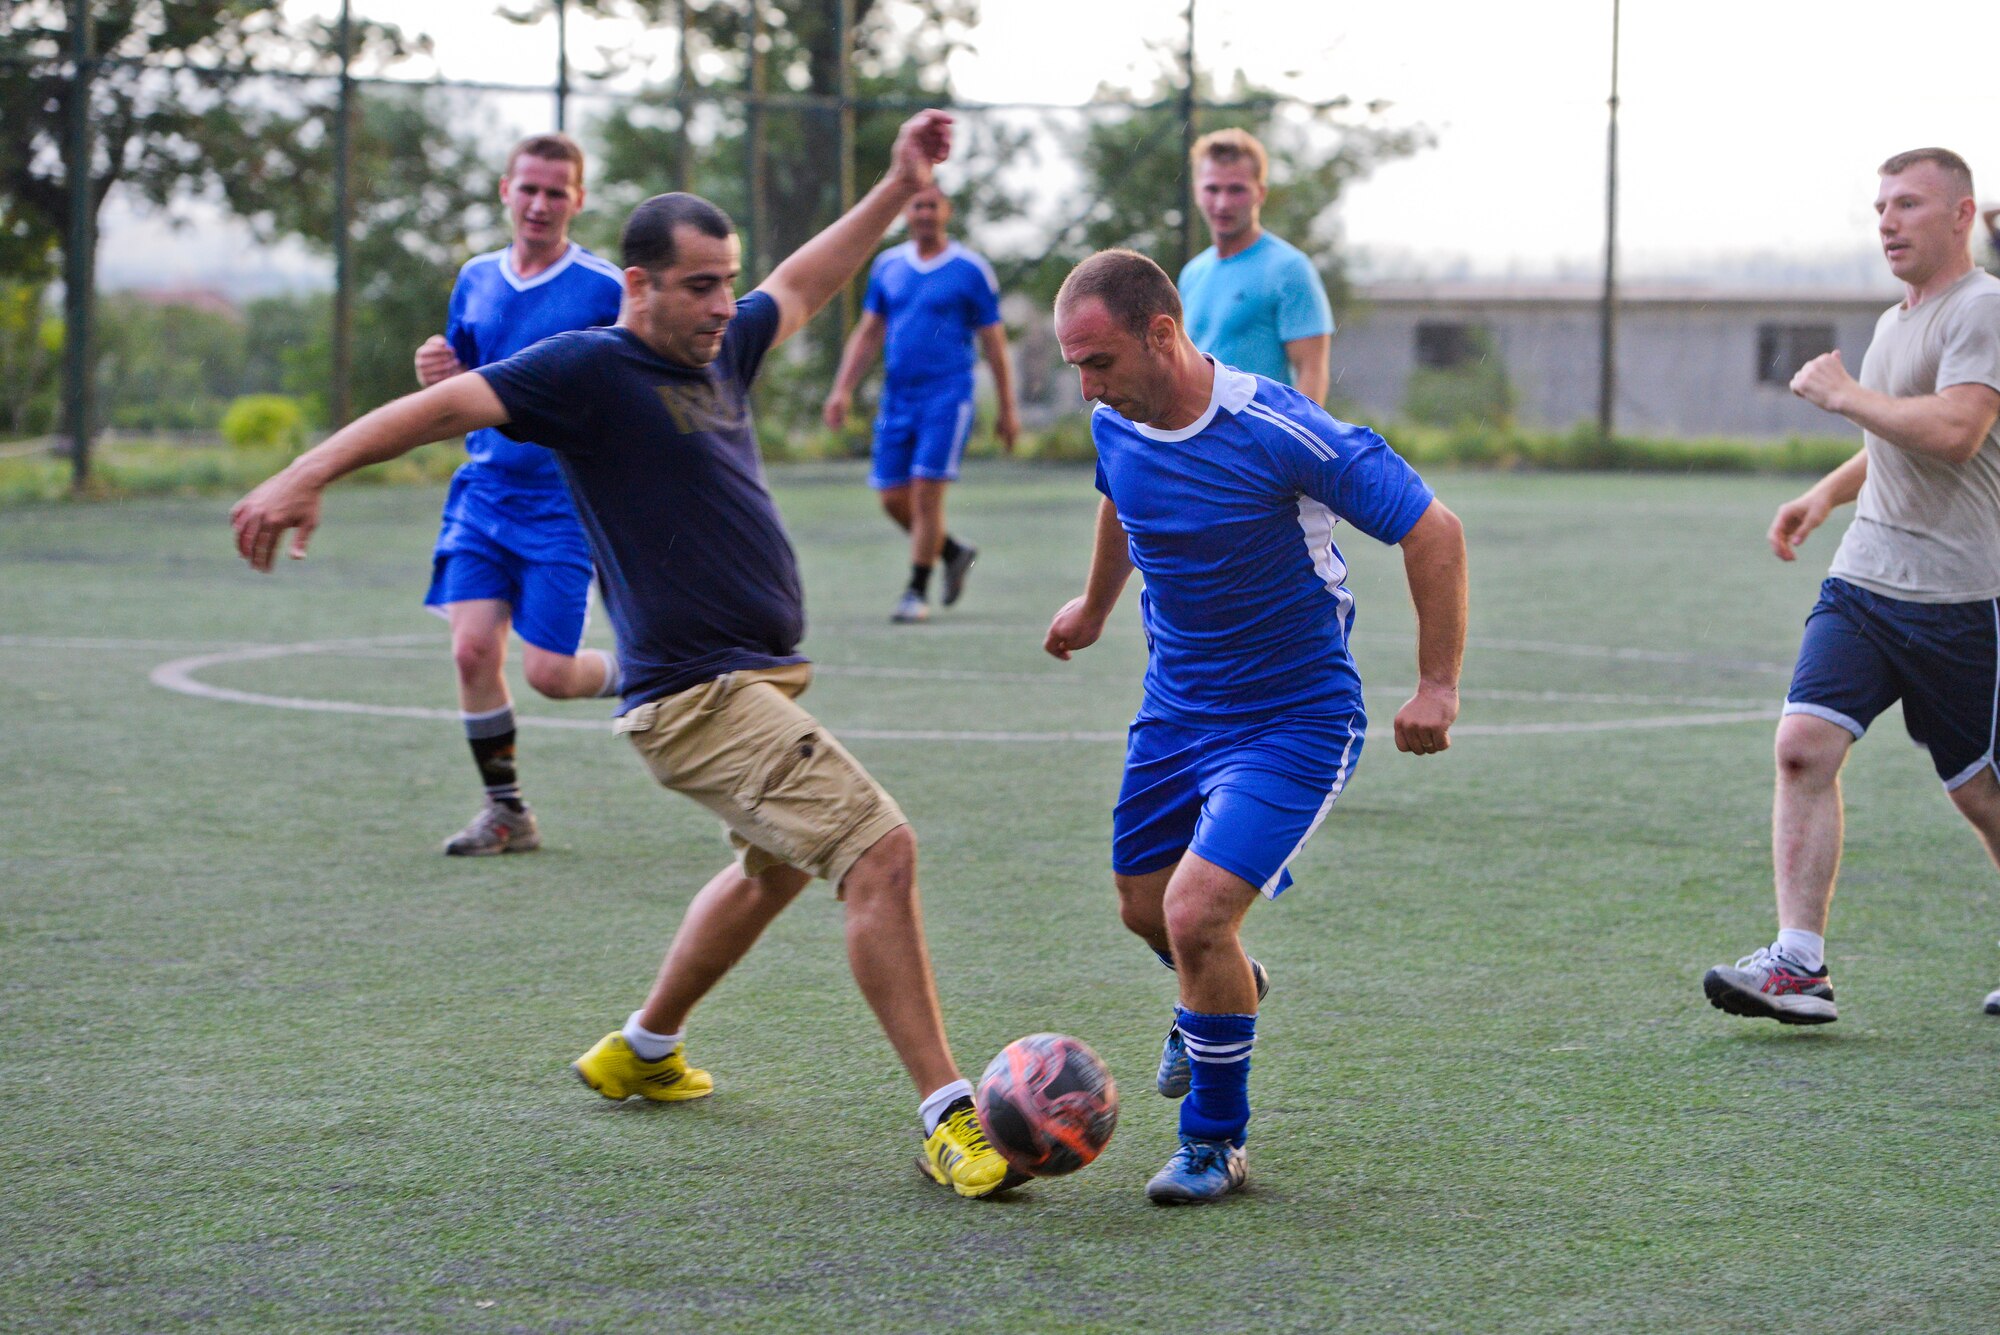 A picture of U.S. Air Force airmen with the New Jersey Air National Guard, U.S. Army soldiers with the 457th Civil Affairs Battalion and members of the 1st Infantry Battalion of the Albanian Land Forces playing soccer.